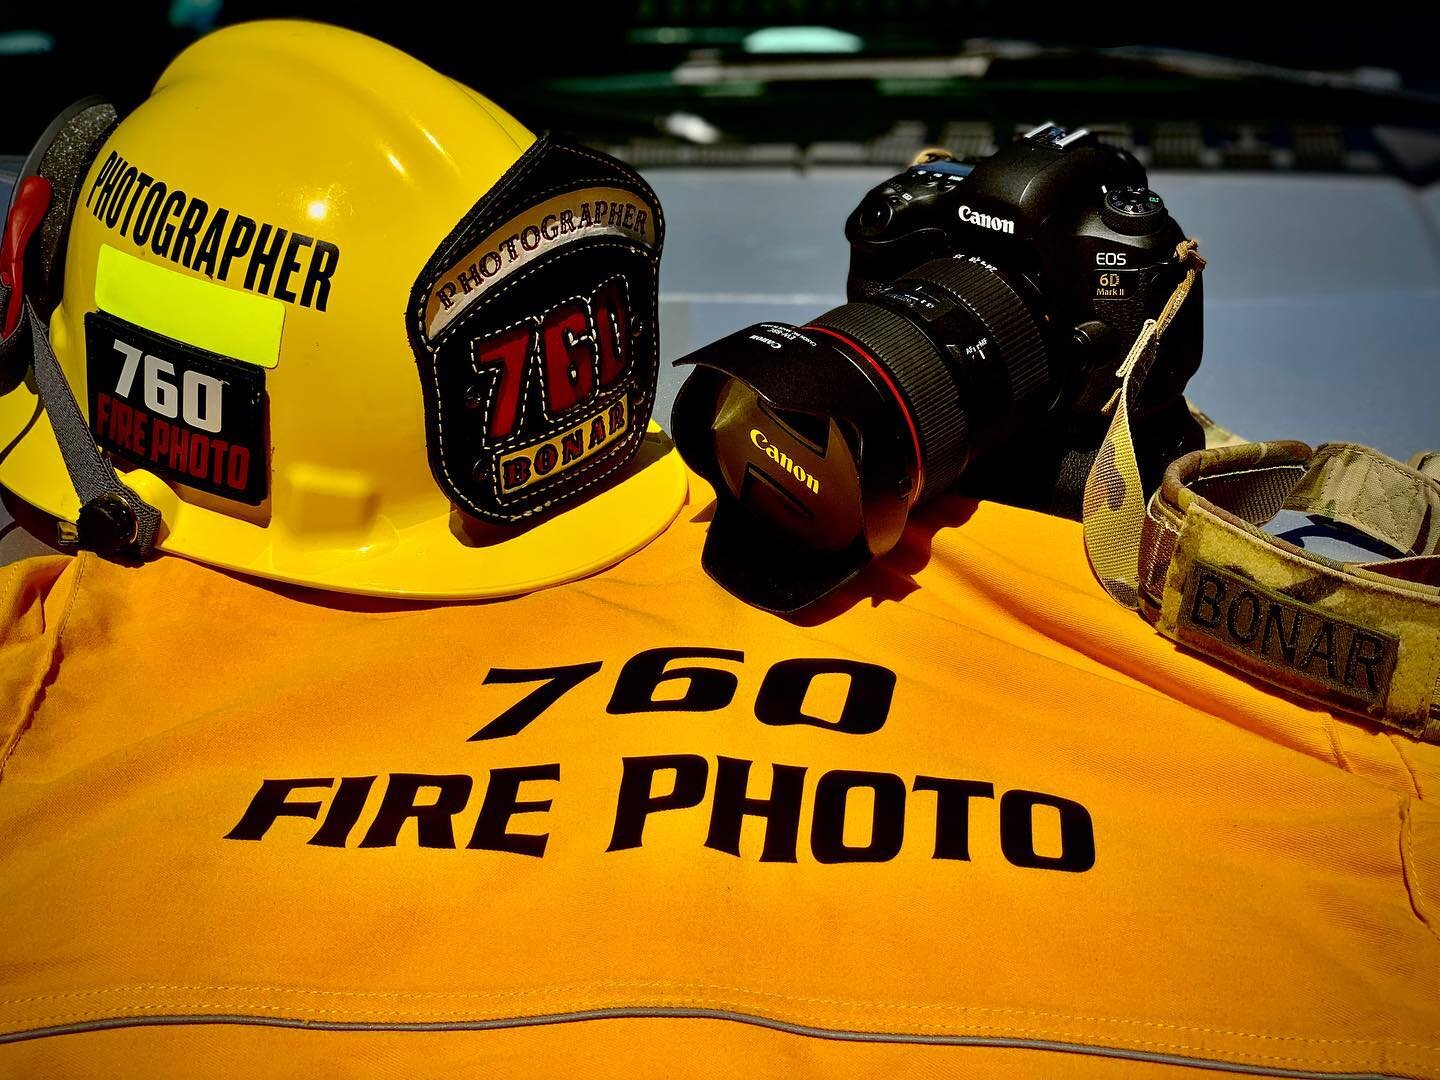 My gear is finally finished. Huge shoutout to everyone who made it what it is! 
.
.
@firefighter_leather @phenixfirehelmets @canonusa @fan4lifedecals 
.
.
.
#fire #firephotographer #firephotography #chiefmillerambassadors #firecompanyalliance